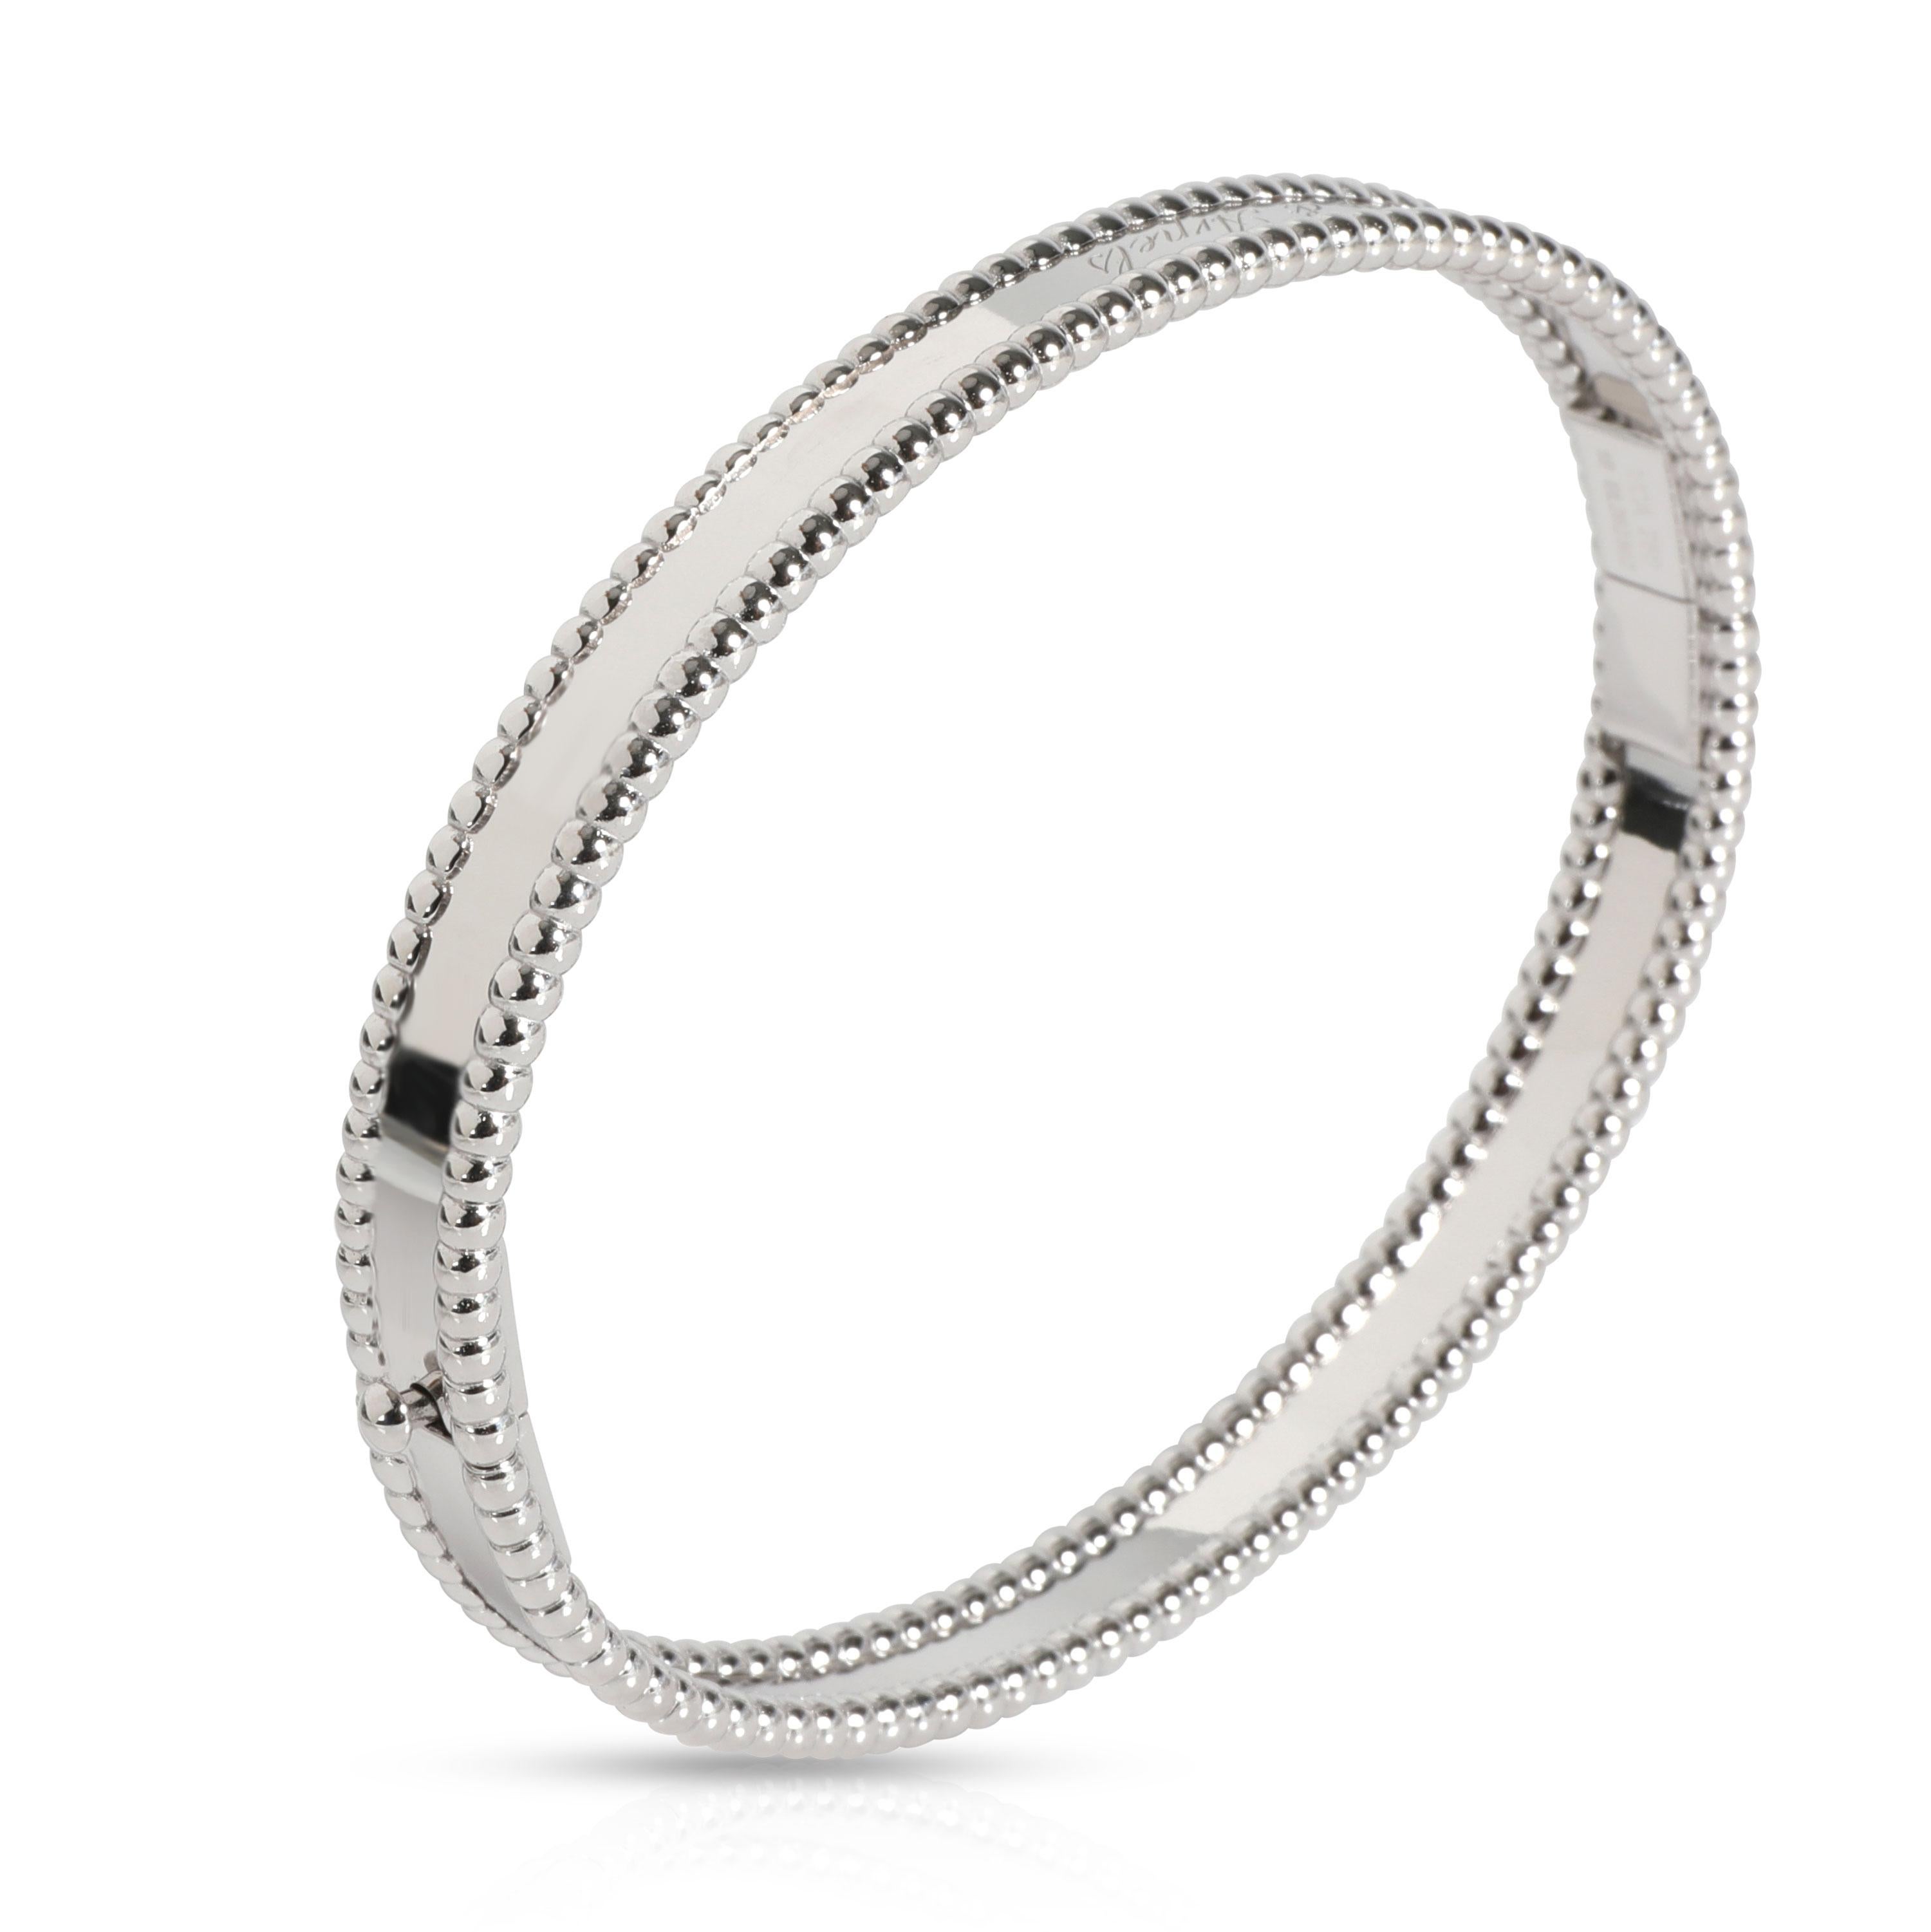 Van Cleef & Arpels Perlee Bracelet in 18K White Gold

PRIMARY DETAILS
SKU: 105218
Listing Title: Van Cleef & Arpels Perlee Bracelet in 18K White Gold
Condition Description: Retails for 6,700 USD. In excellent condition and recently polished by Van